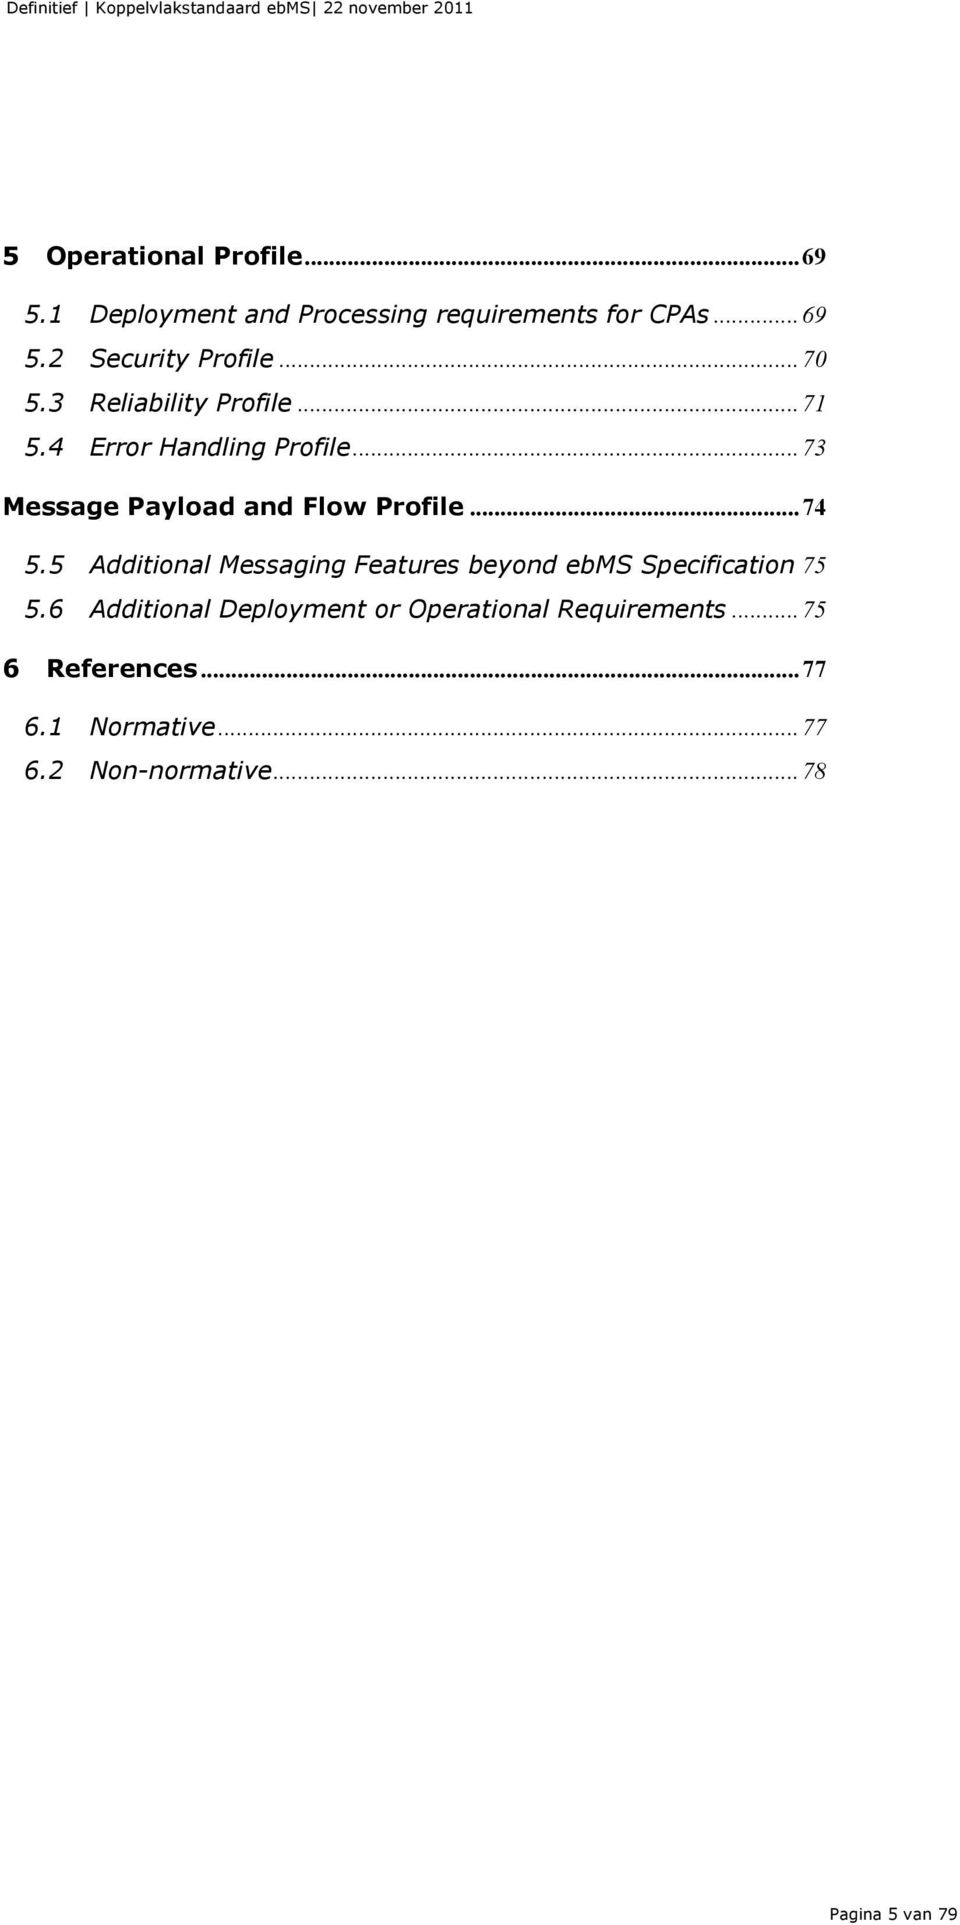 .. 74 5.5 Additional Messaging Features beyond ebms Specification 75 5.